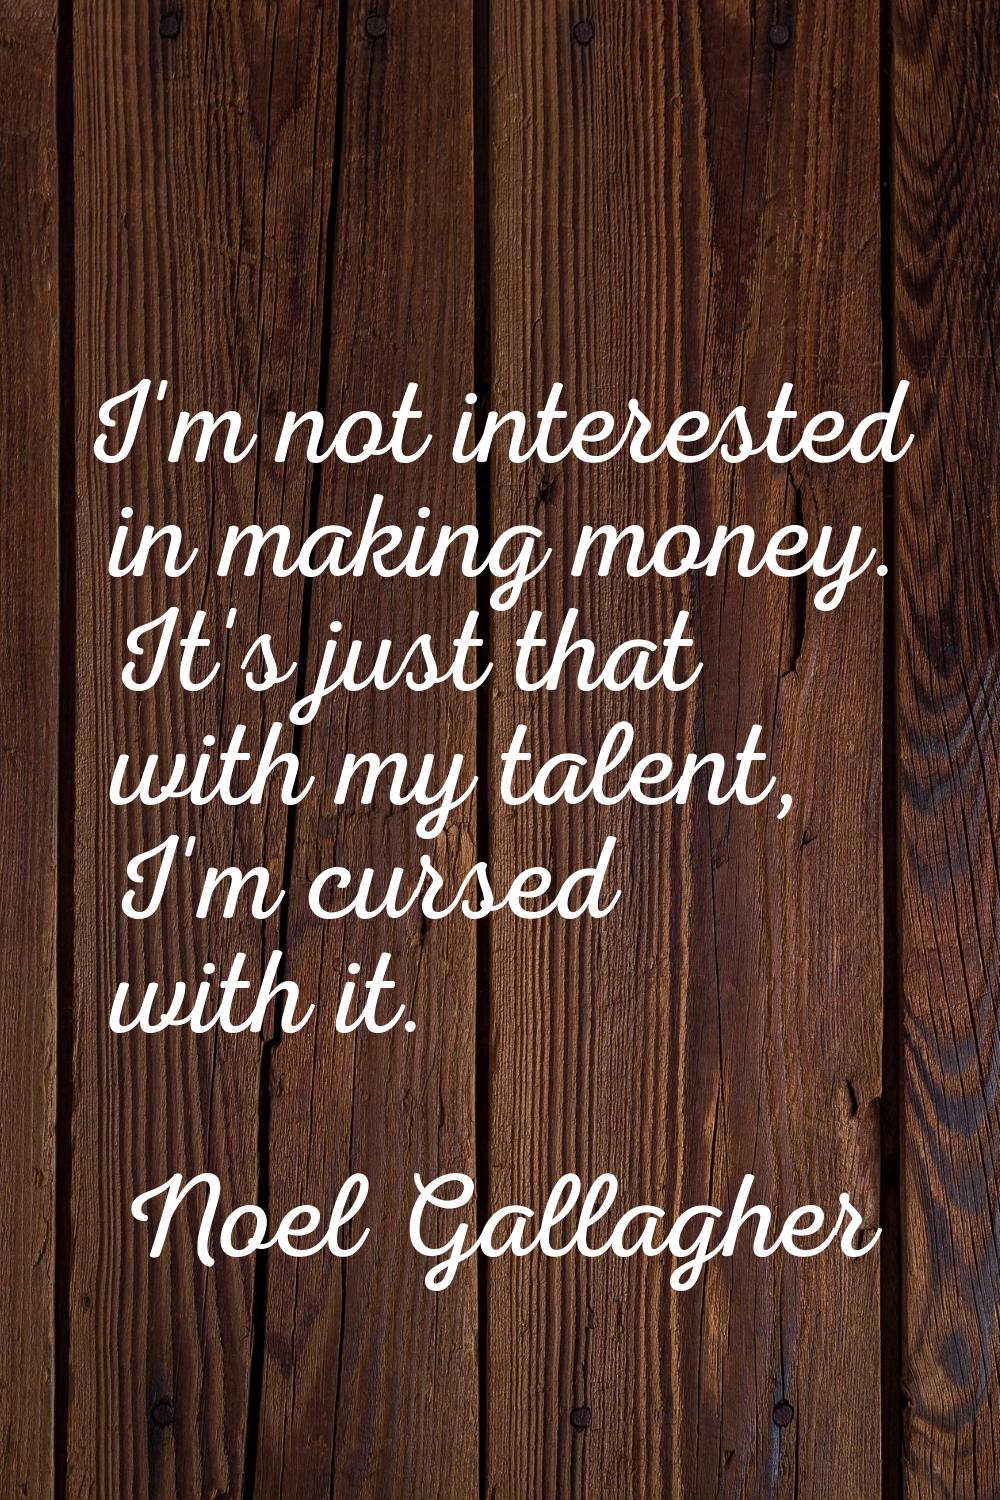 I'm not interested in making money. It's just that with my talent, I'm cursed with it.